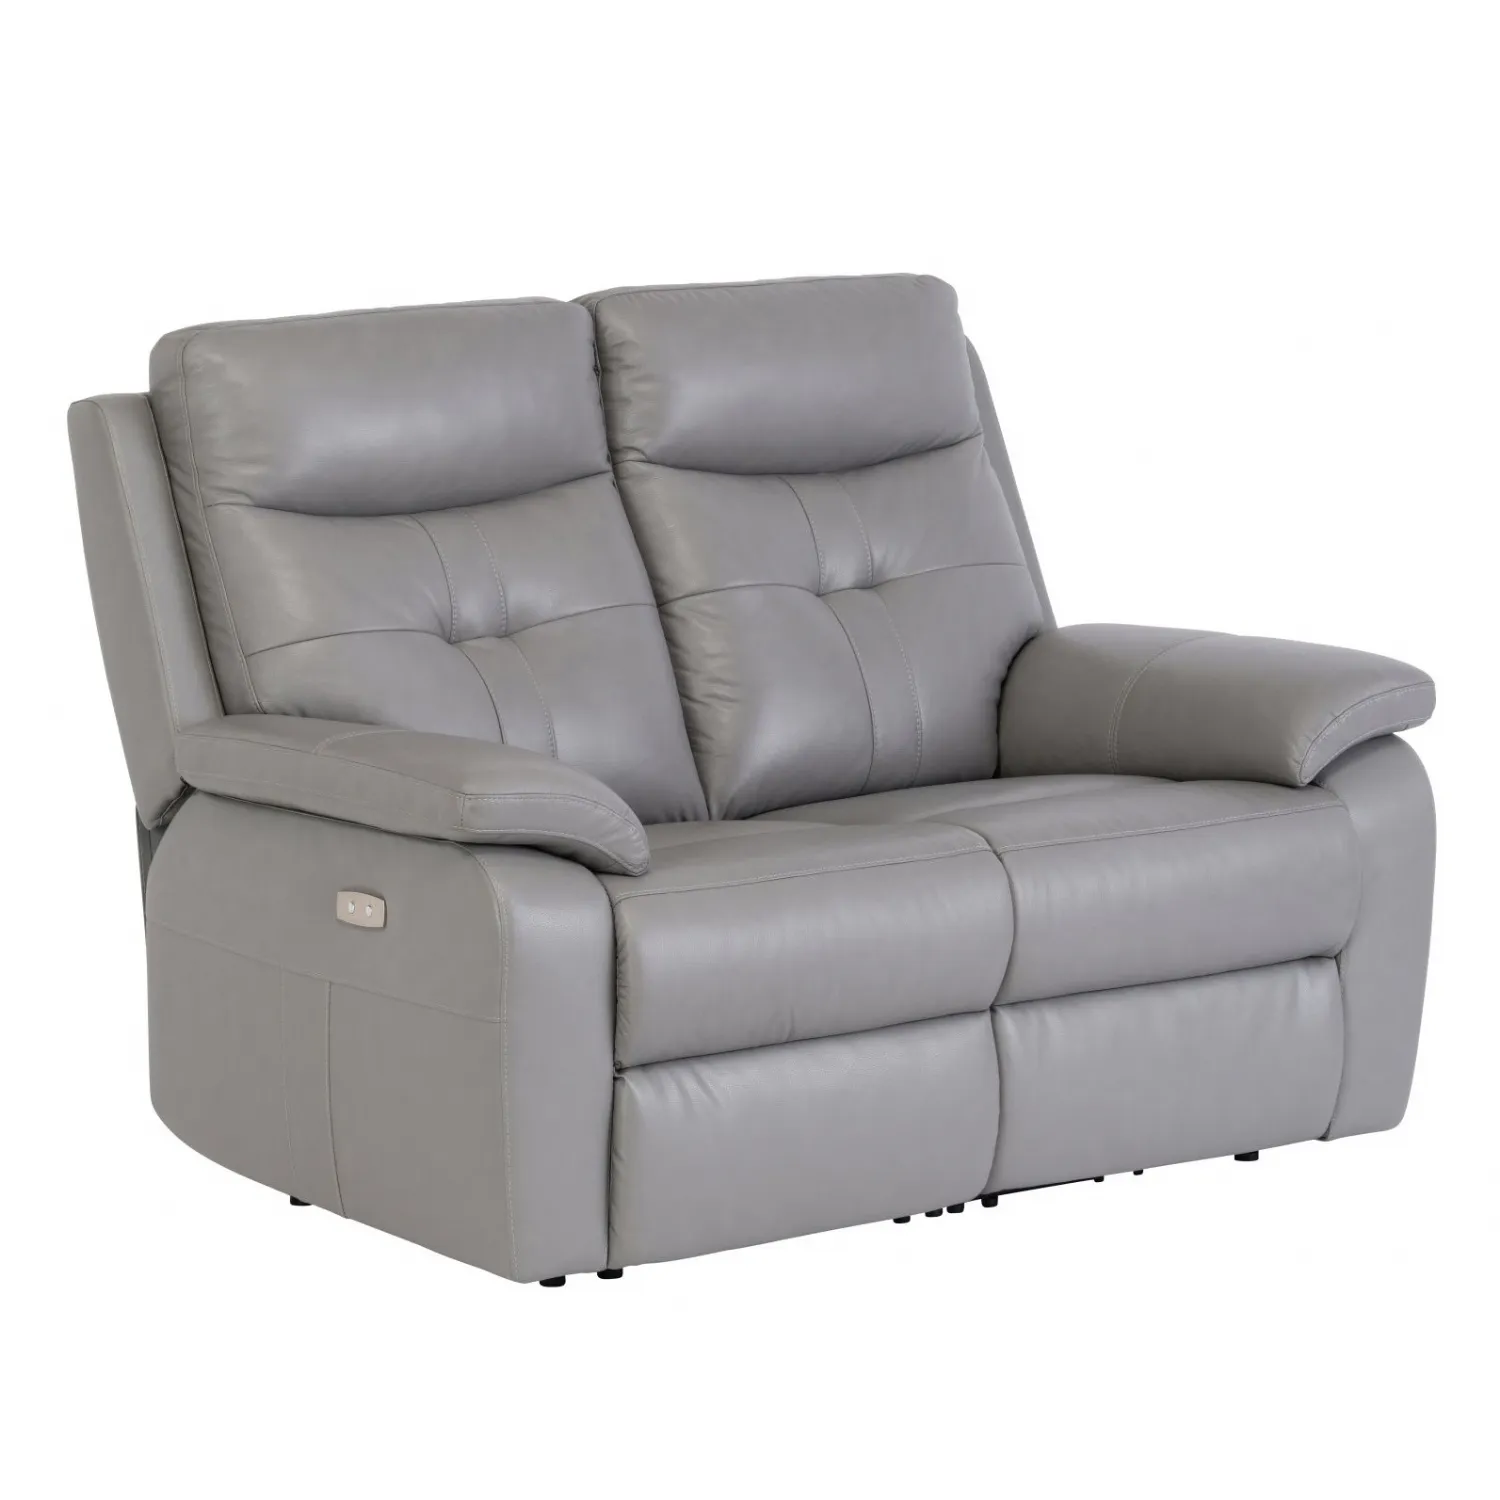 Grey Italian Leather Electric Recliner 2 Seater Sofa